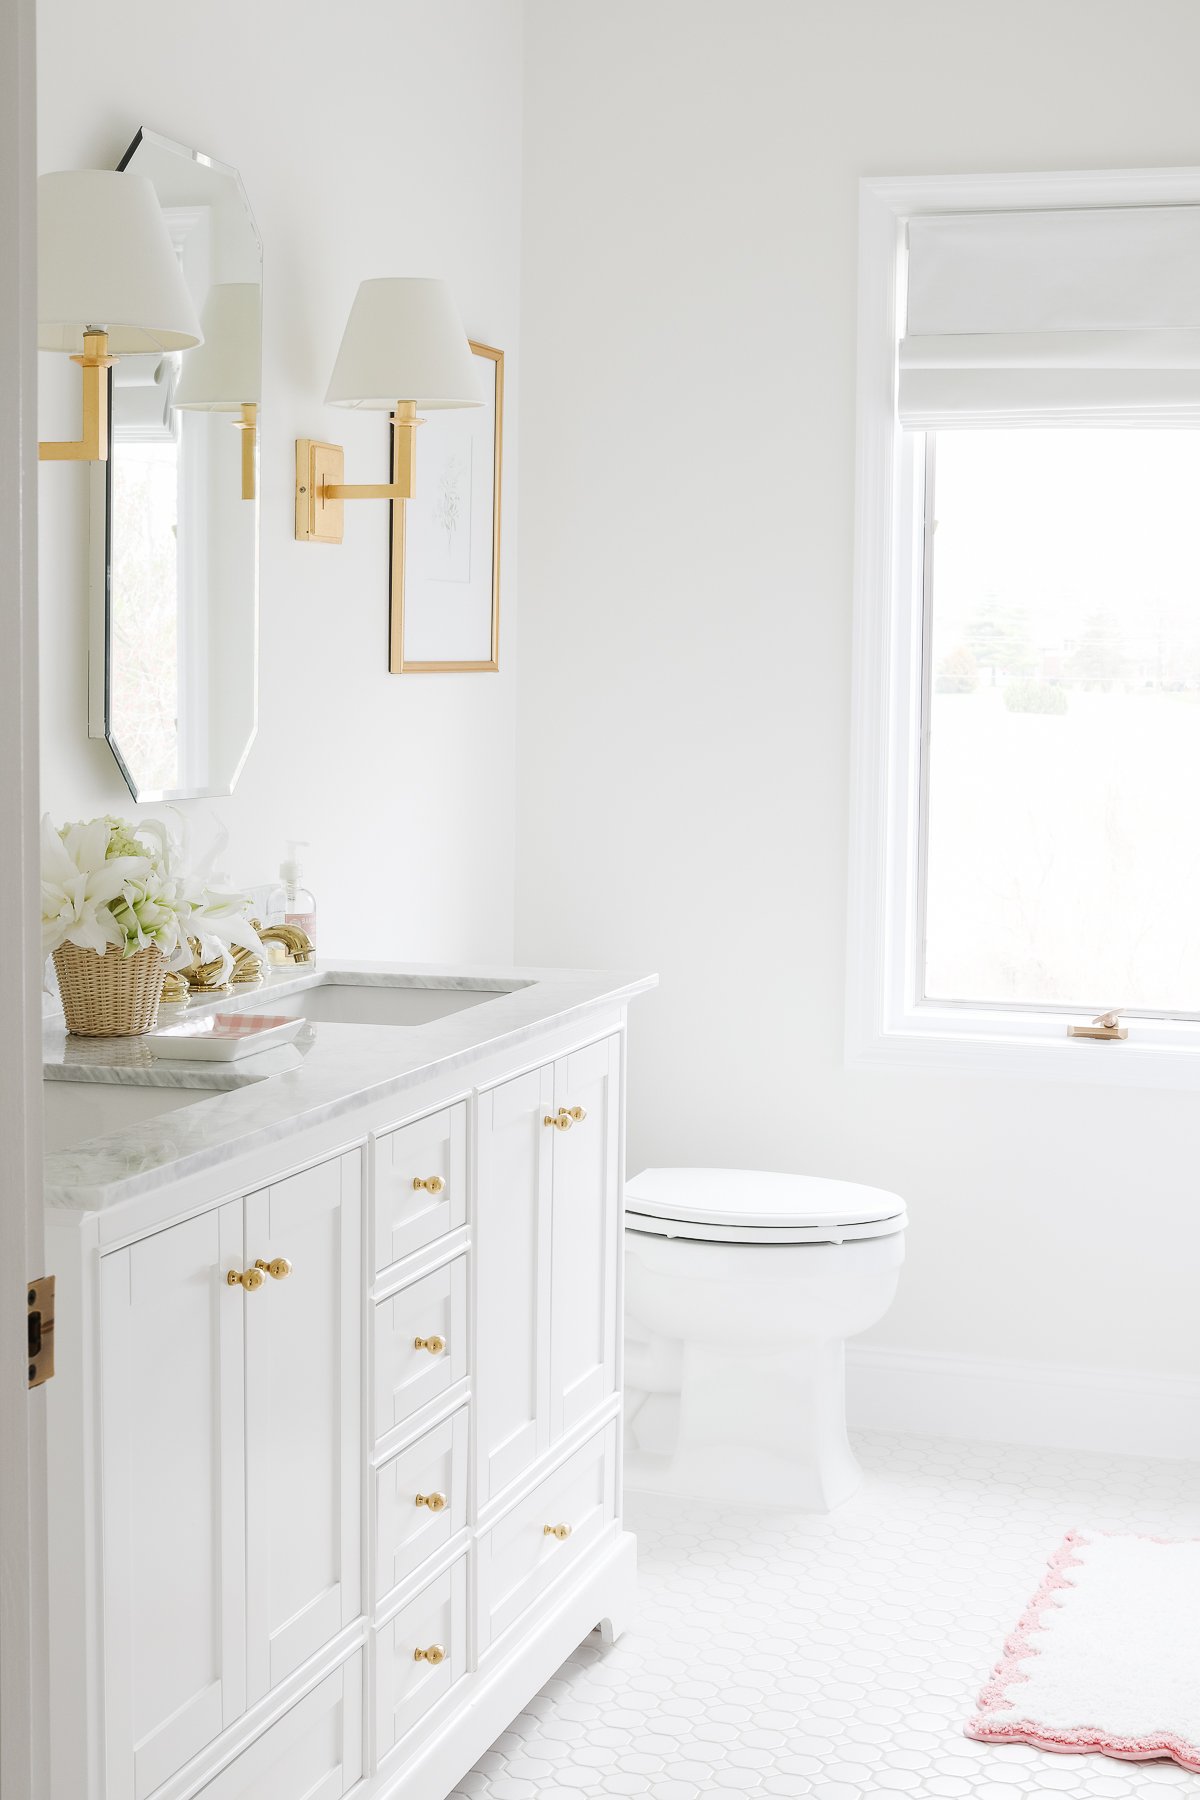 A white dove bathroom with gold accents and a window.